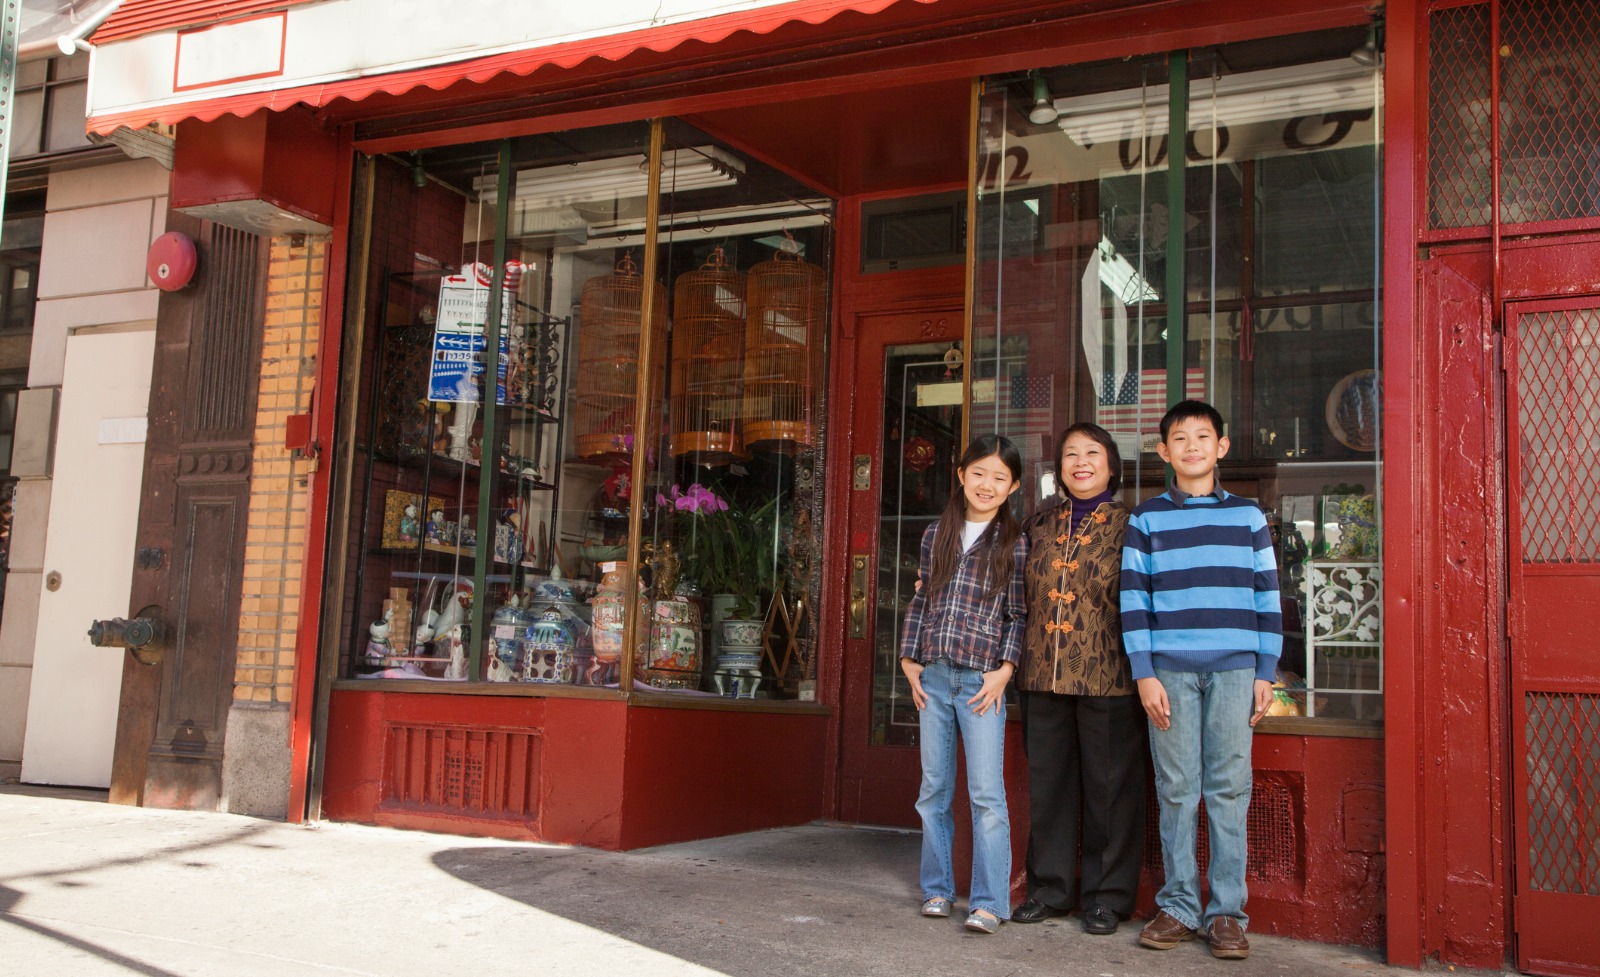 A smiling Asian family standing in front of a storefront.